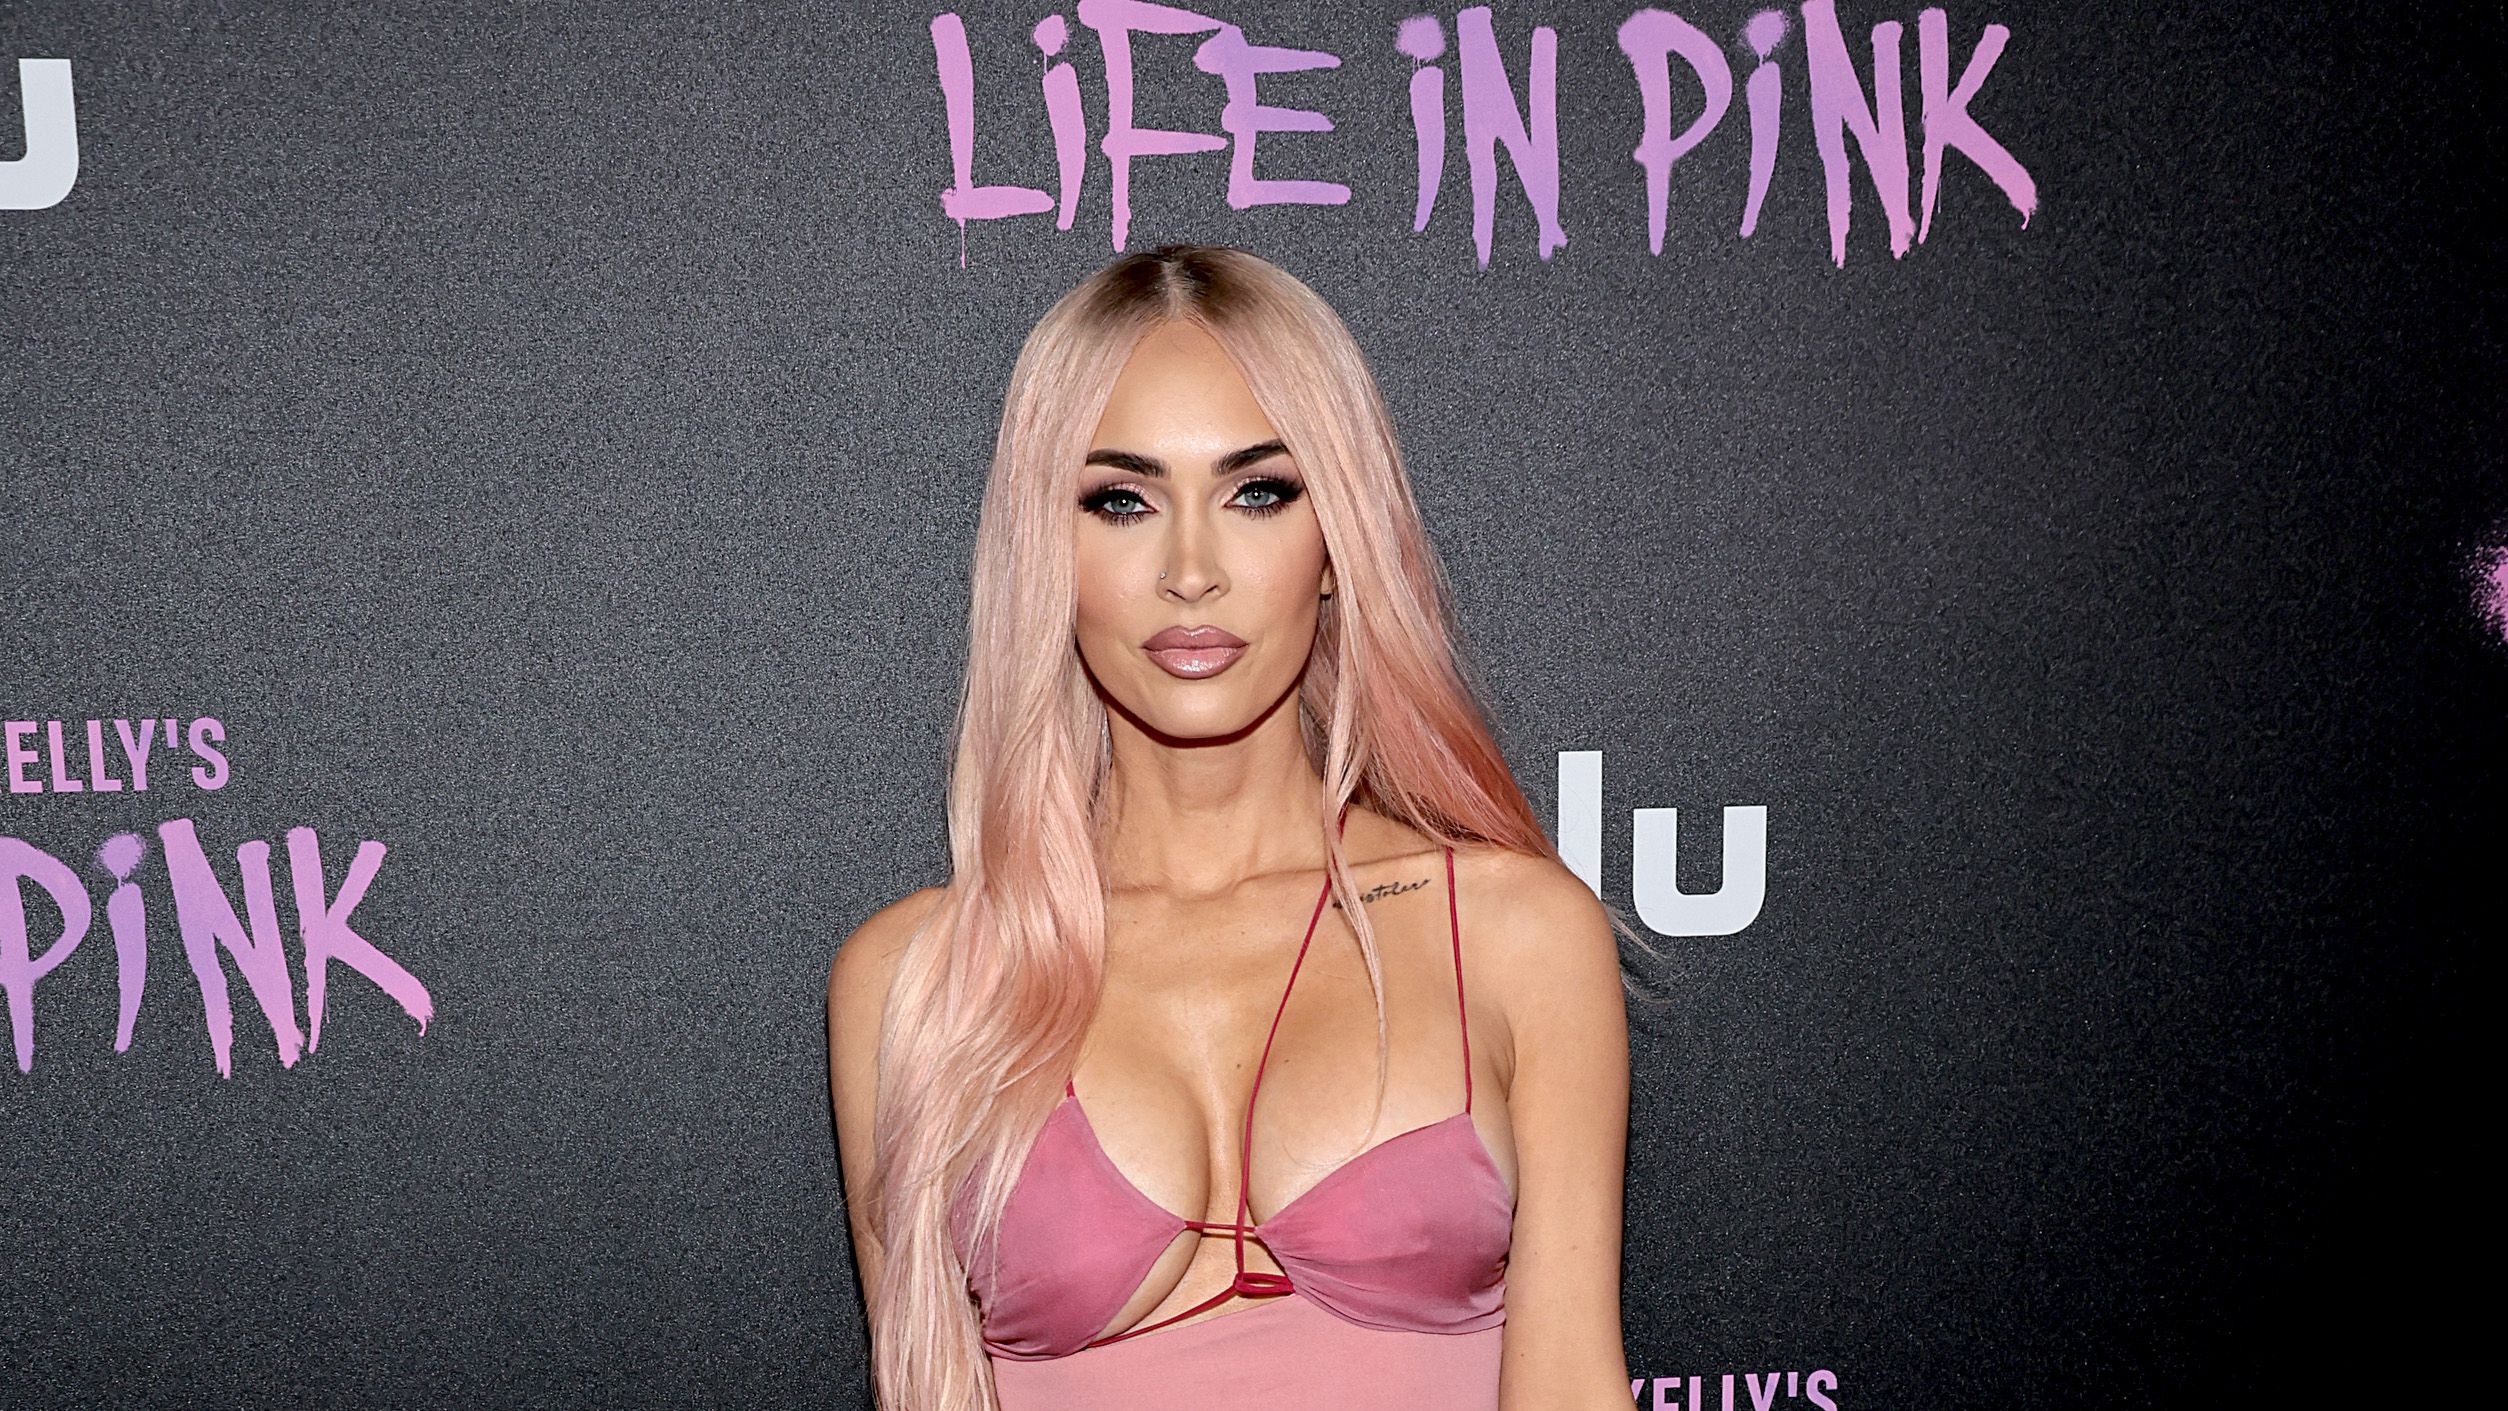 Megan Fox just wore a pink, jeggings-style catsuit